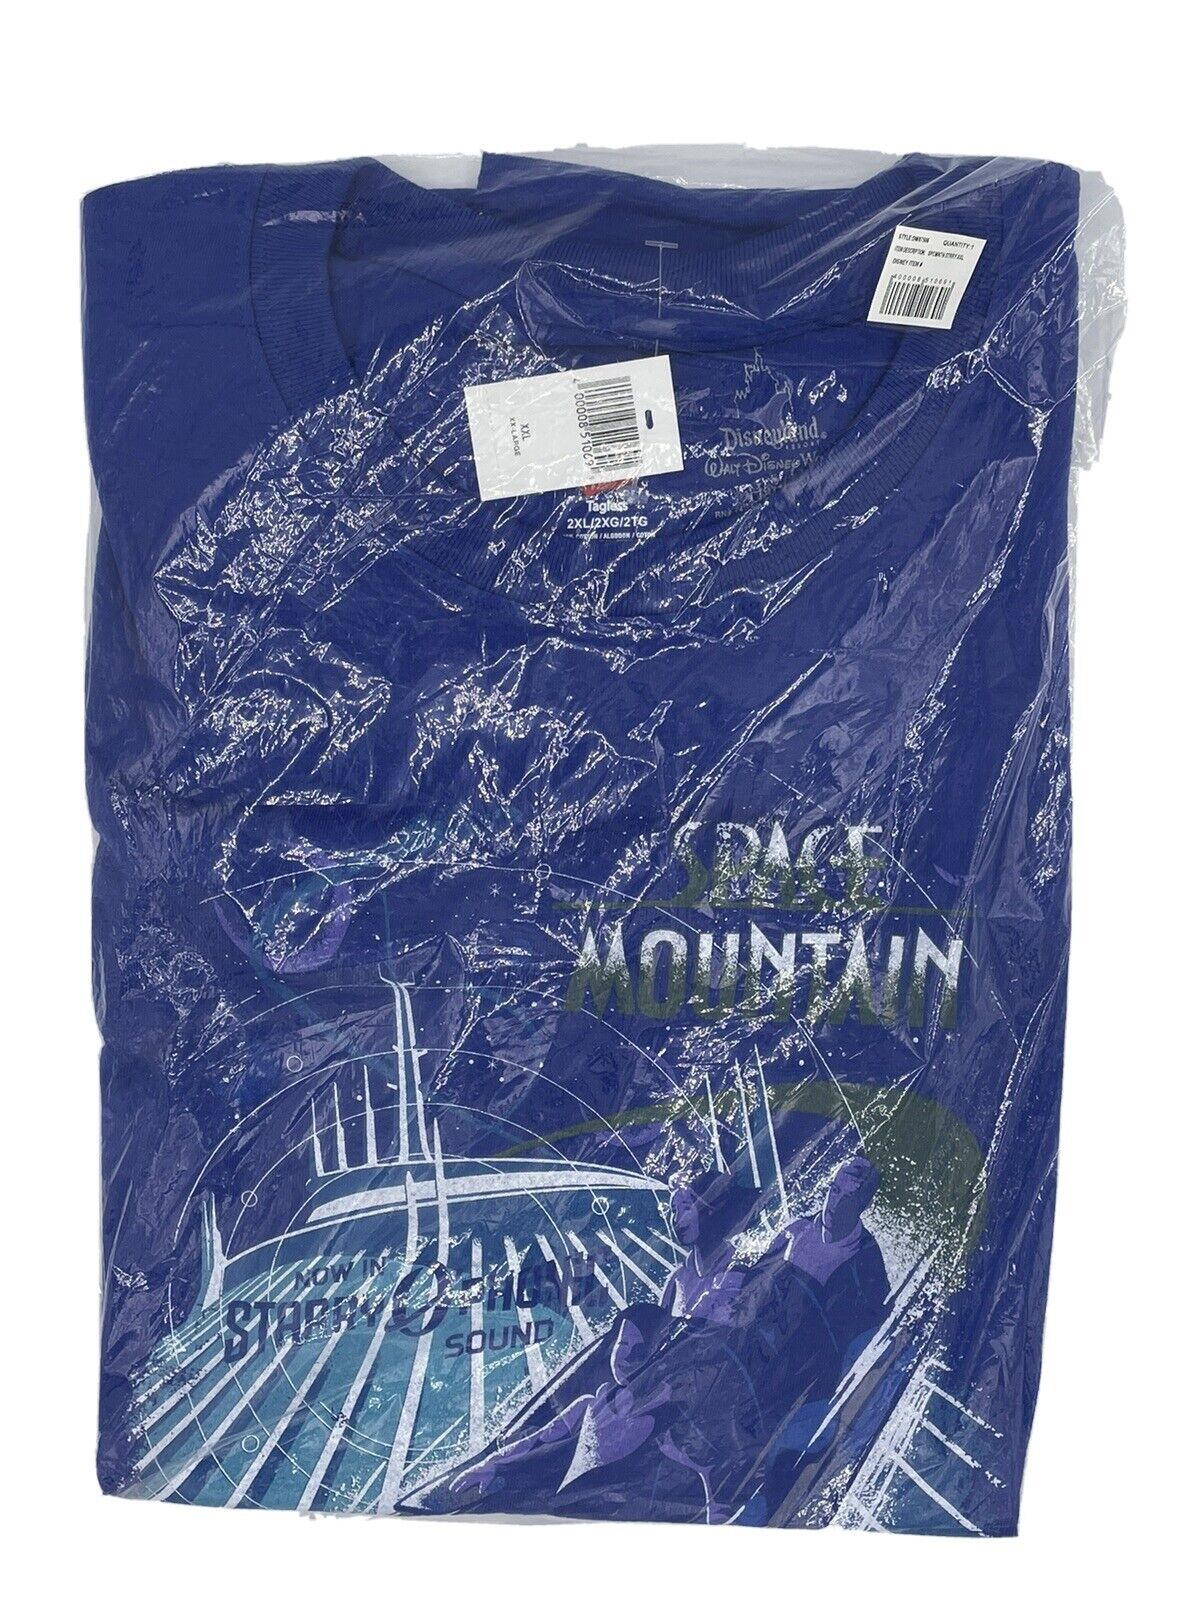 RARE, LE, NEW DISNEY Space Mountain Attraction Poster t-shirt in sealed bag, XXL